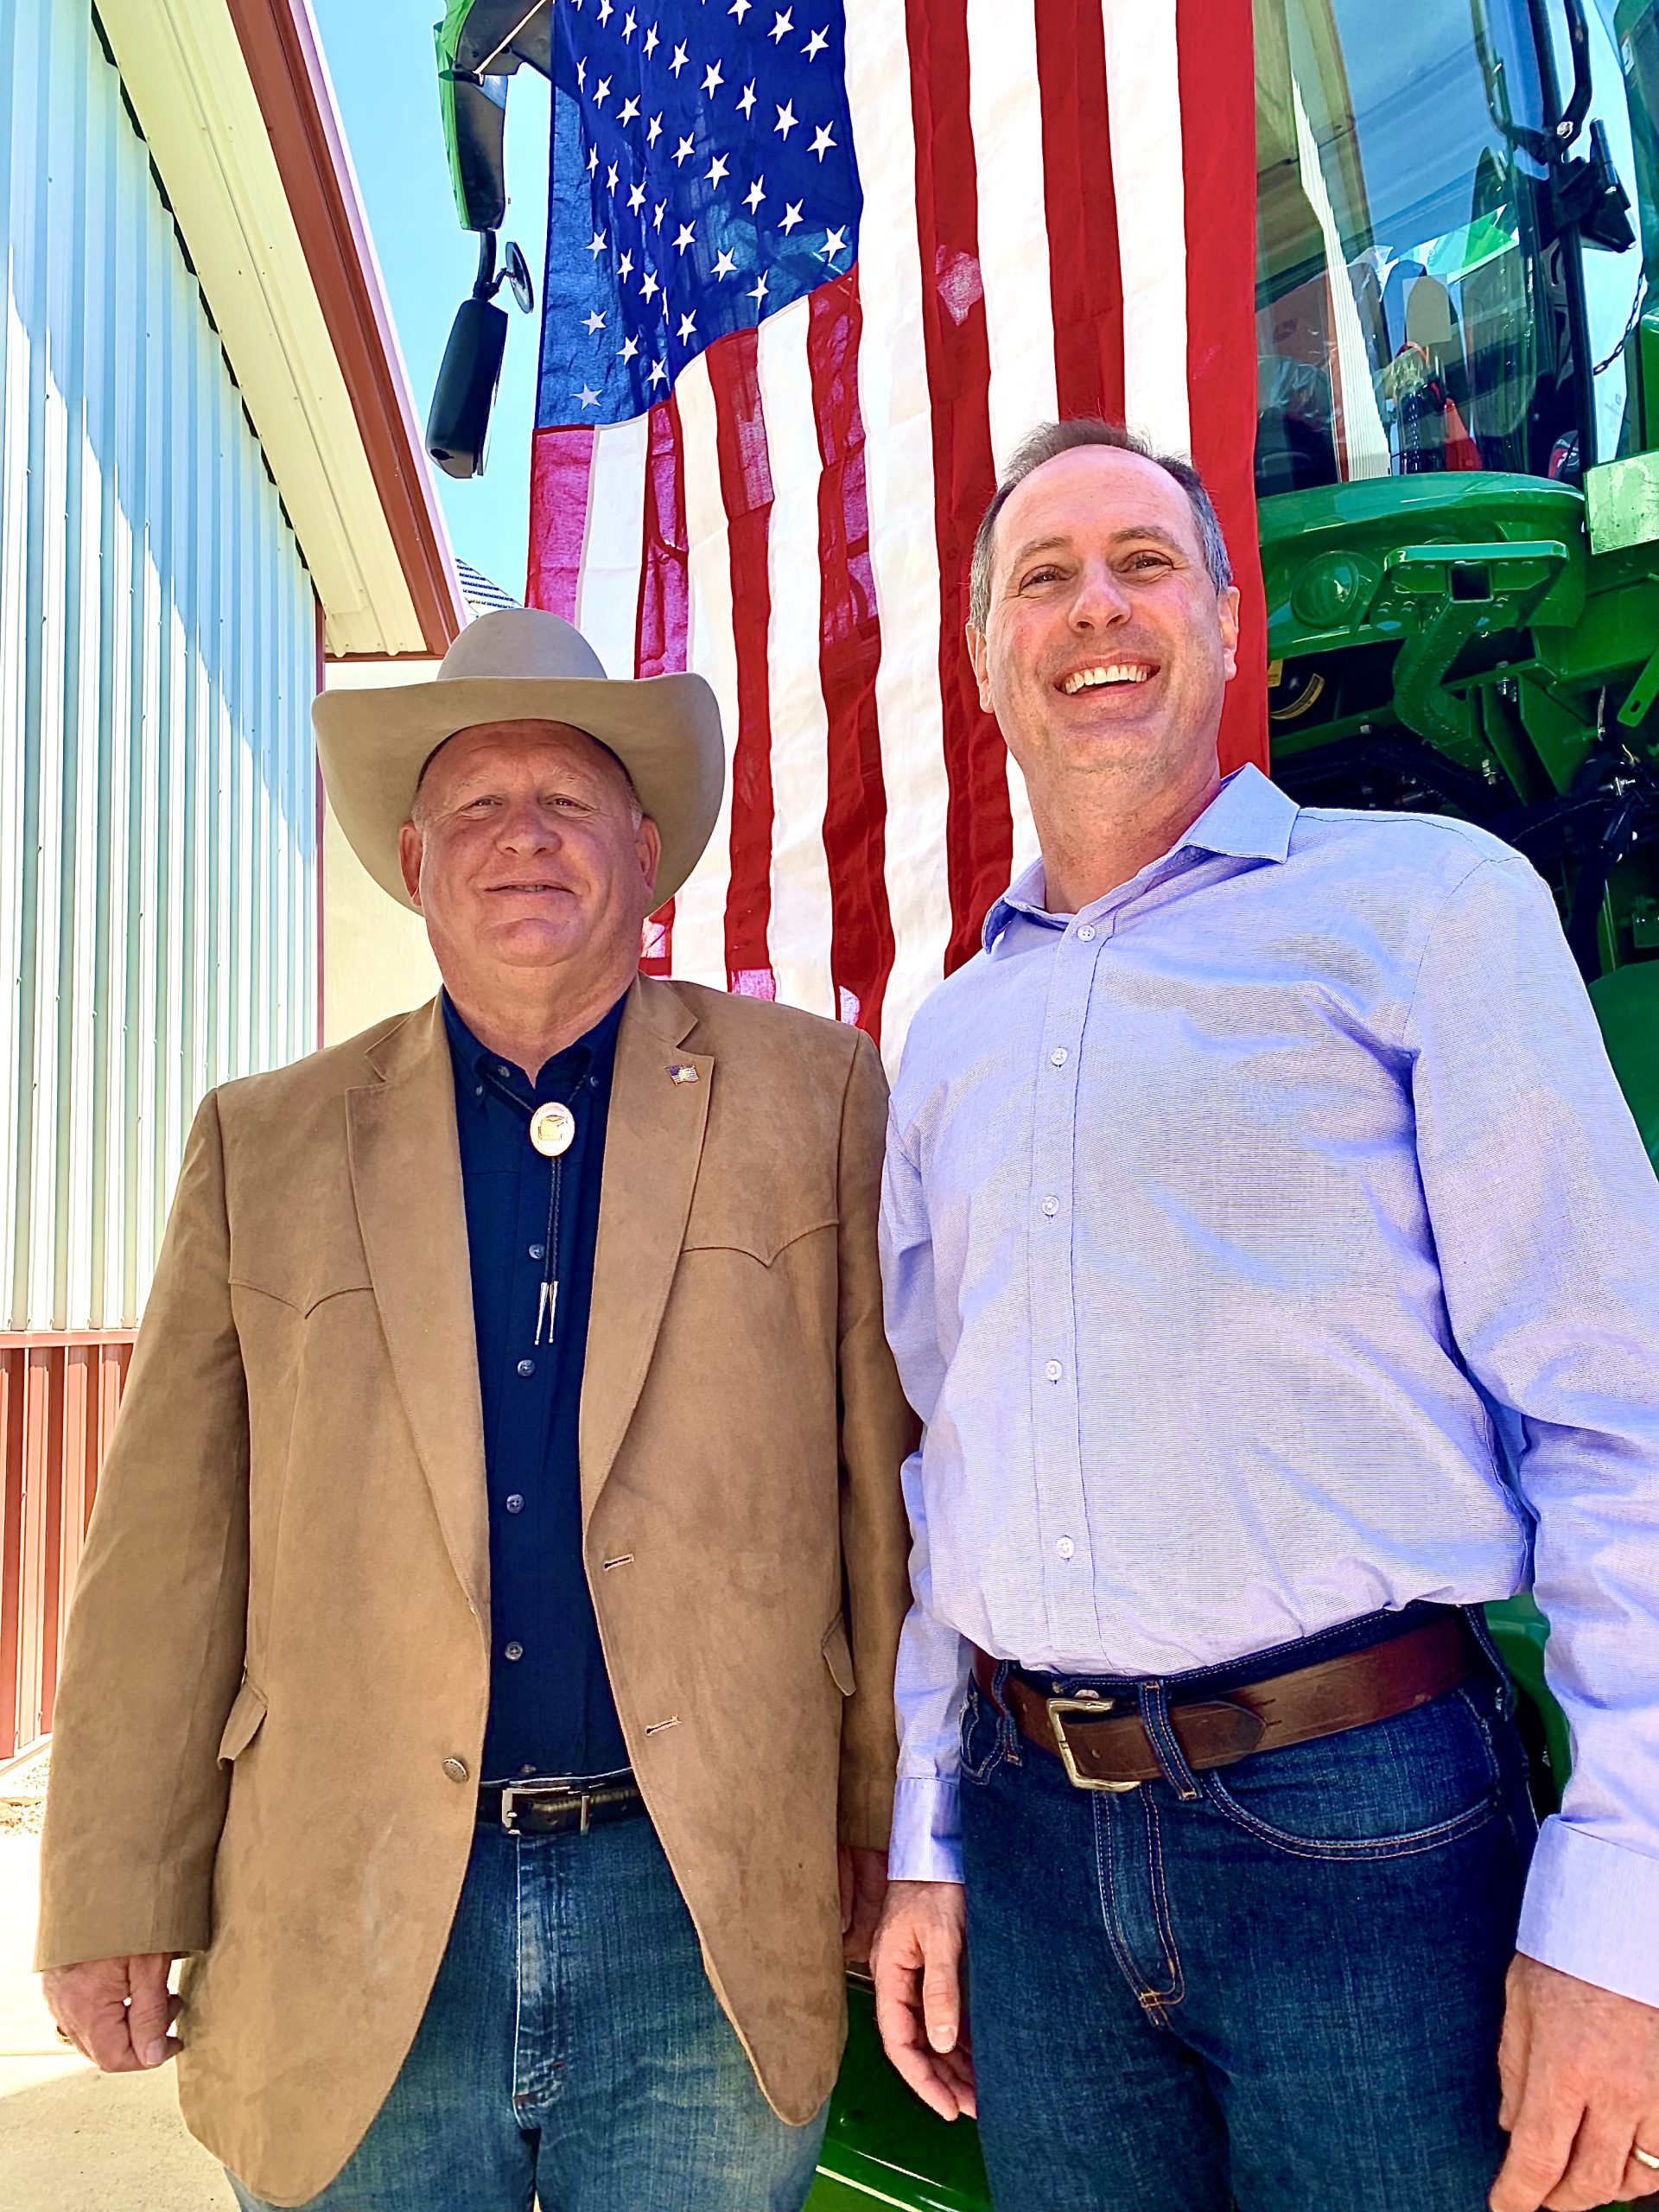 U.S. Reps. Glenn “GT" Thompson, R-PA, chairman of the House Agriculture Committee, left, and Tracey Mann, R-KS, pose for photos in front of a patriotic backdrop May 2, after the Kansas Food & Agriculture Listening Session in a farm shop north of Gypsum, Kansas (Photo by Tim Unruh.)